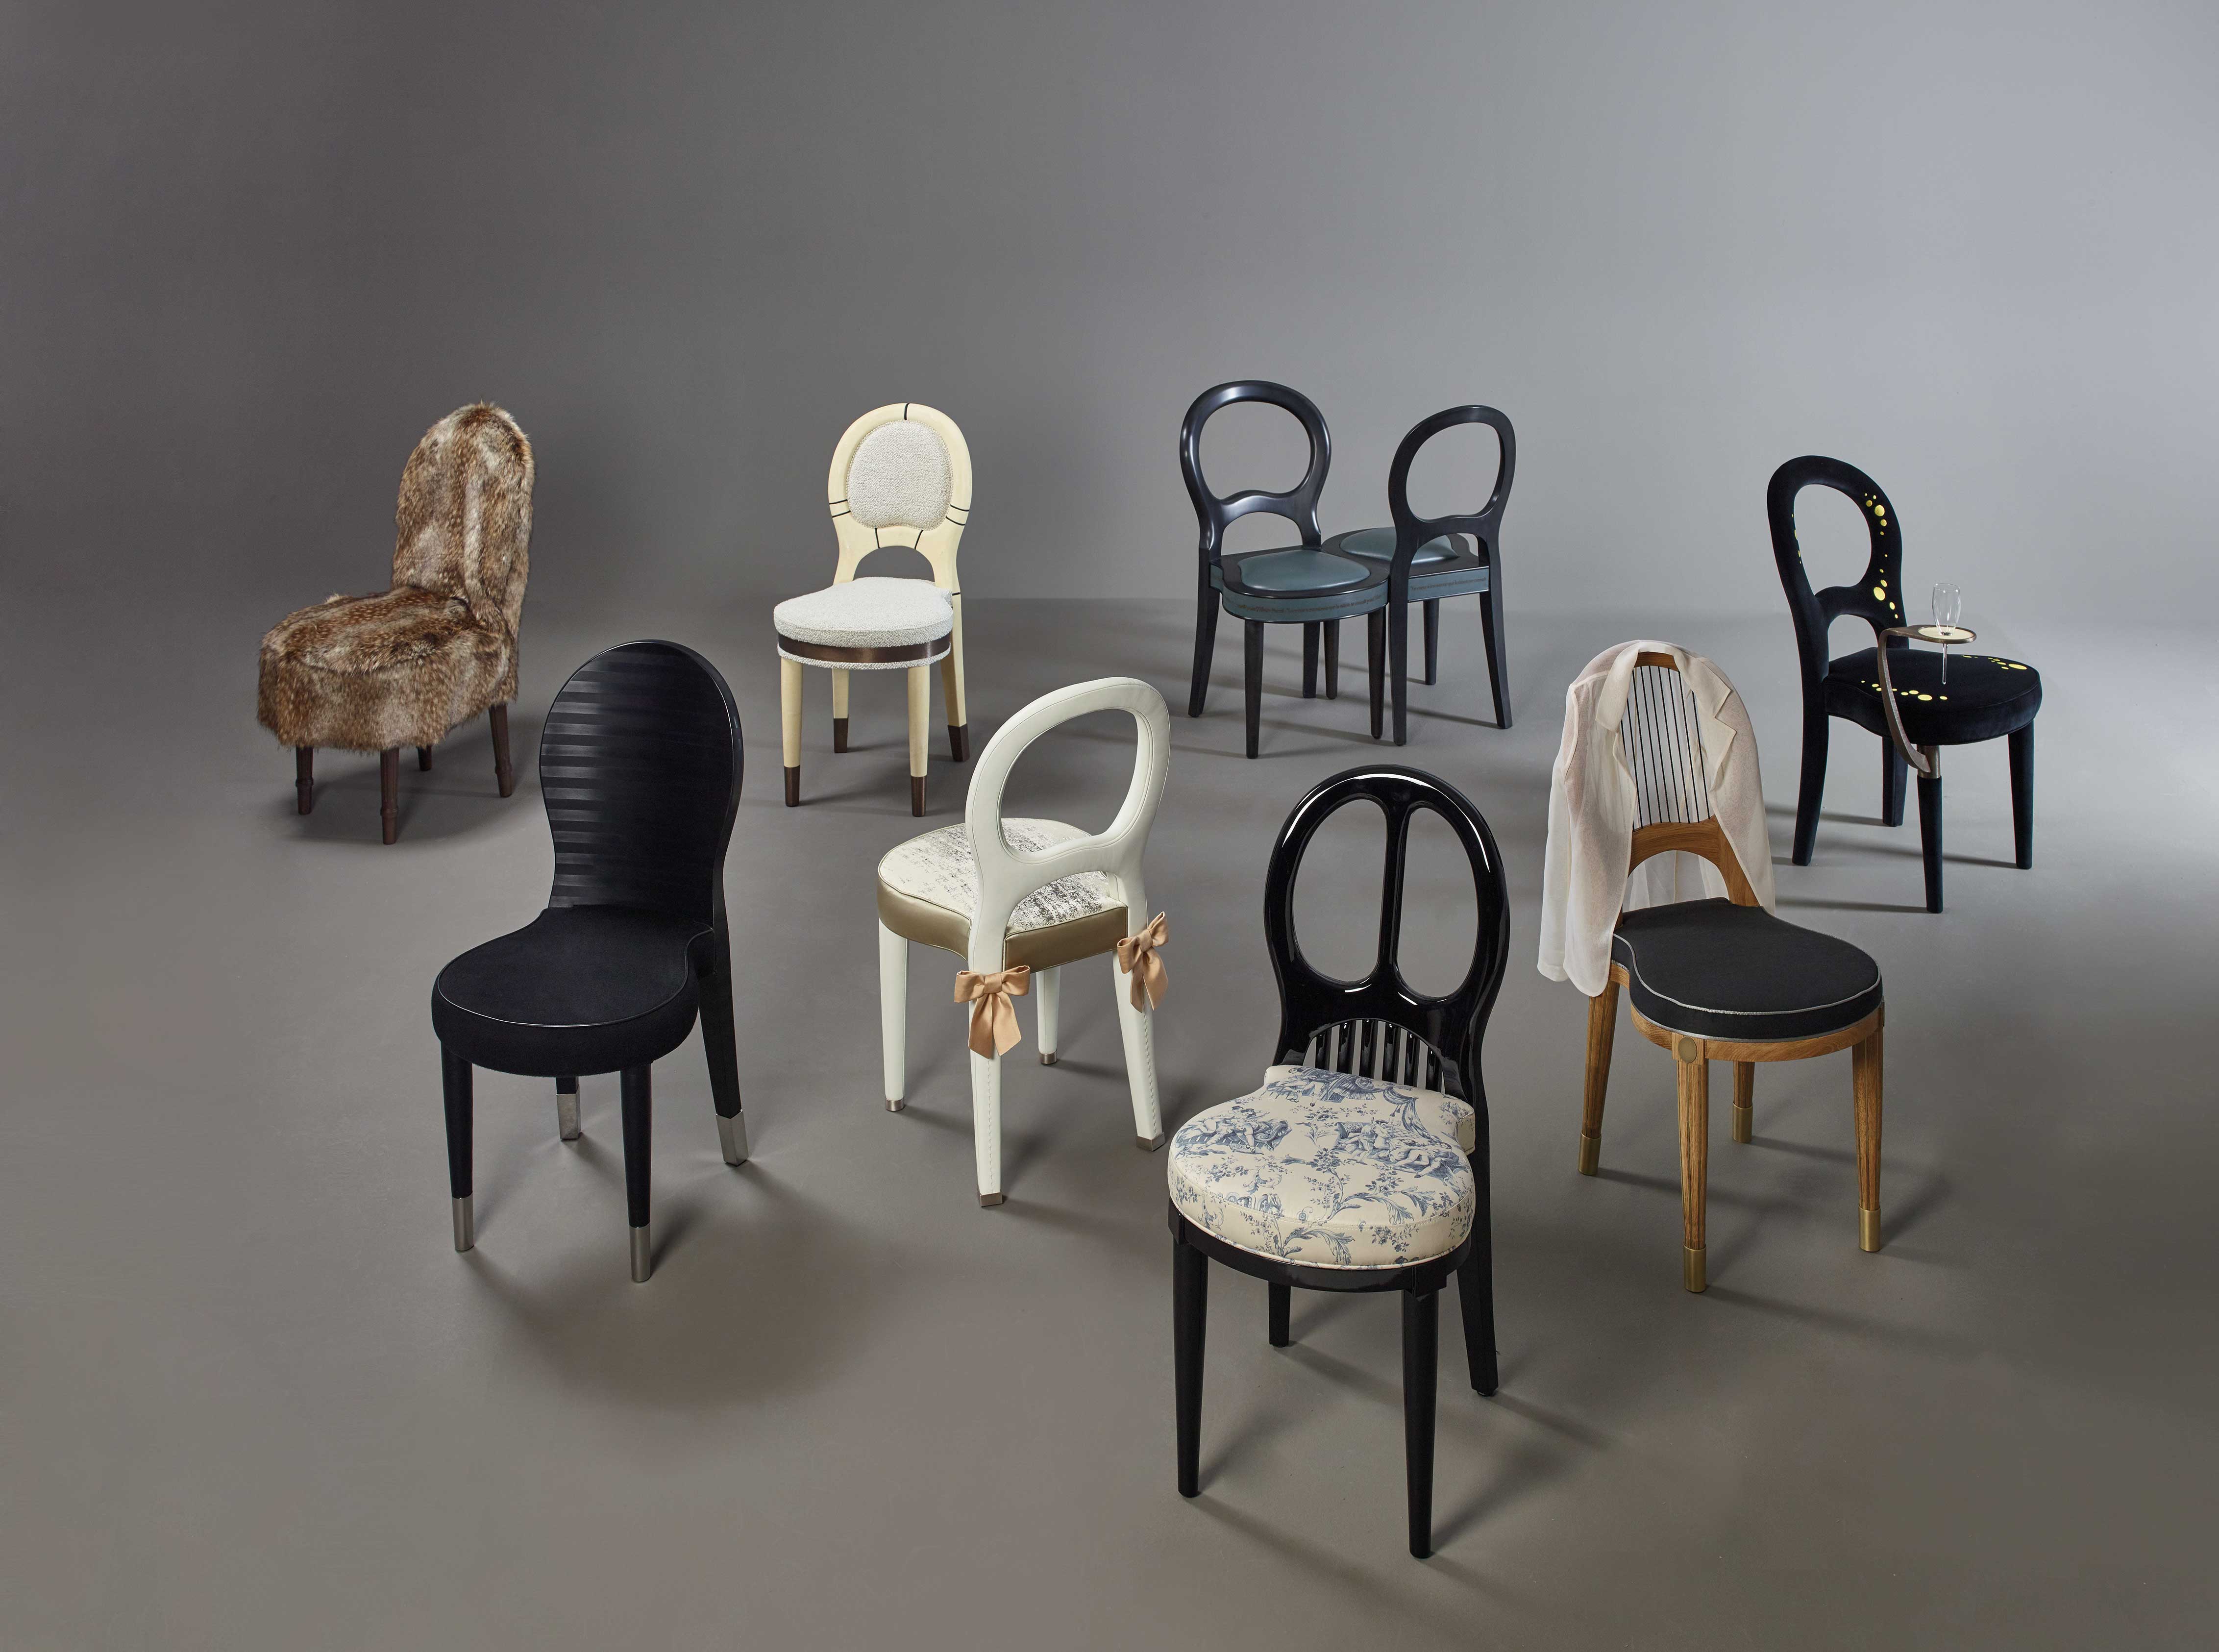 Different versions of Bilou Bilou, a dining chair covered in velvet and linen or nappa leather available in different colors and in the versions standard, large and kids. Bilou Bilou is the most iconic dining chair from Promemoria's catalogue | Promemoria